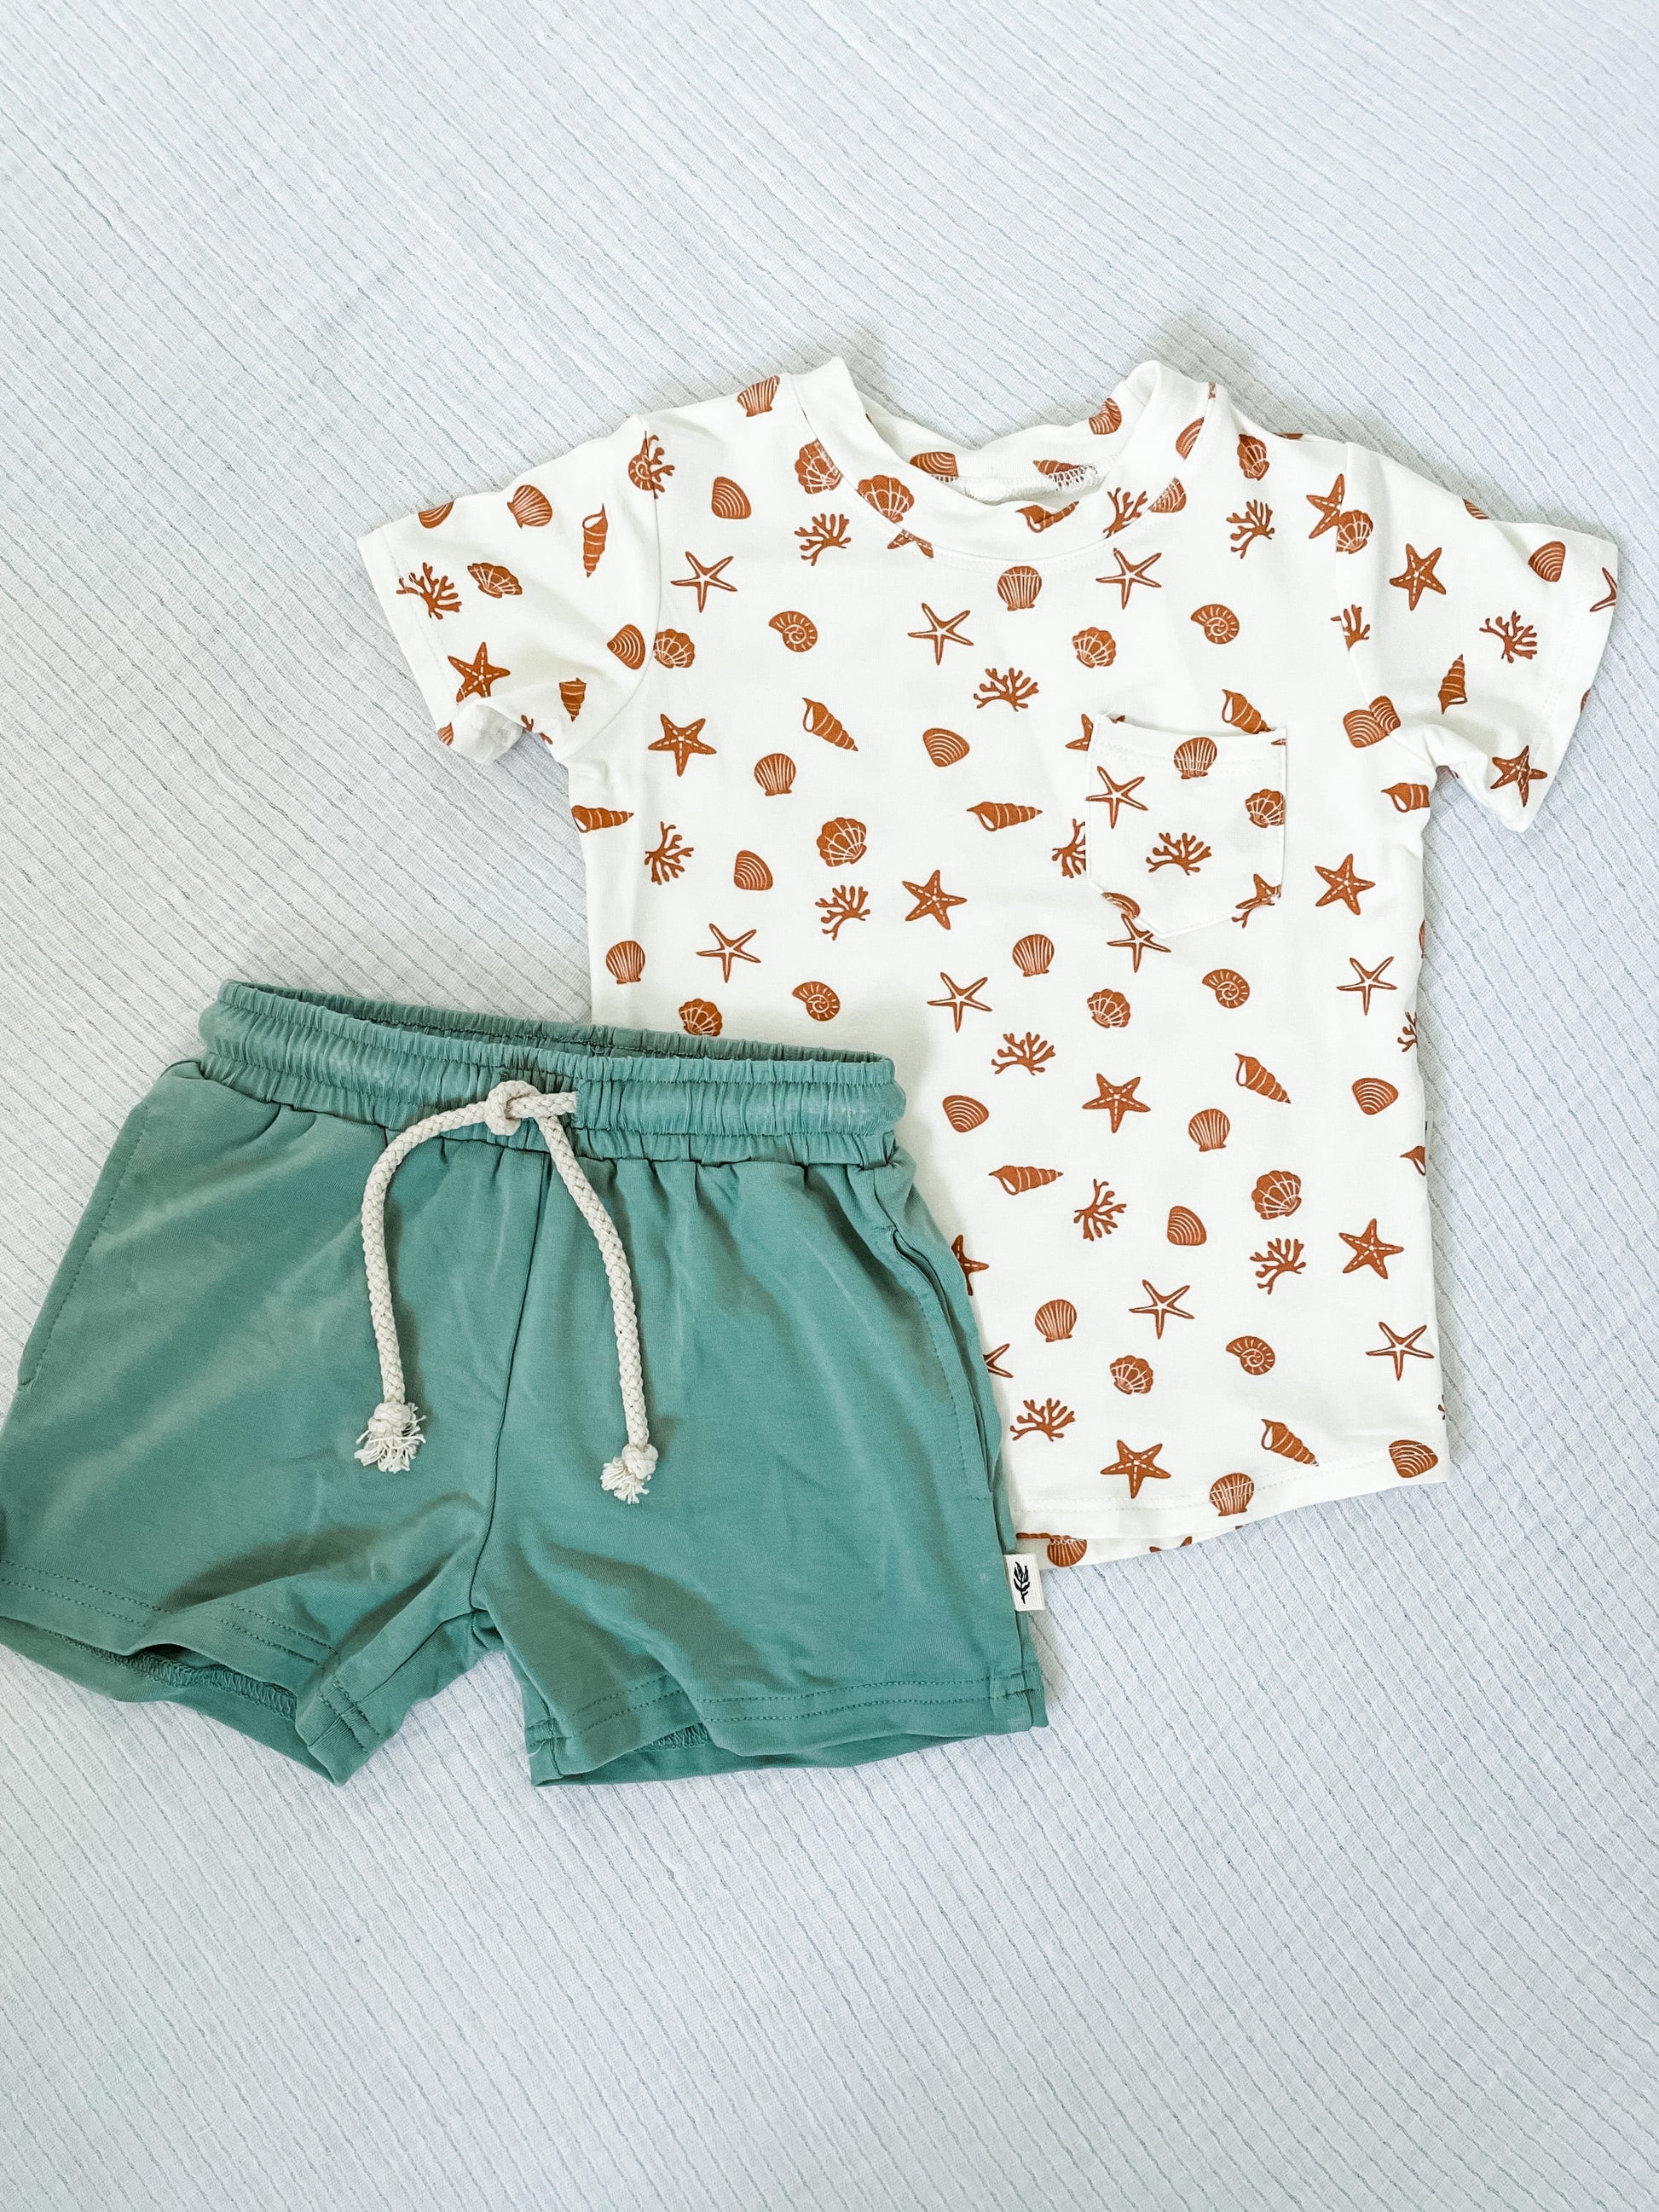 covelLiam Pocket Bamboo Tee - Seashells - Premium t-shirt from babysprouts clothing company - Just $20! Shop now at covel0-12, 12-24, baby, baby top, boys, Faire, kid top, Kids, Toddlercovel